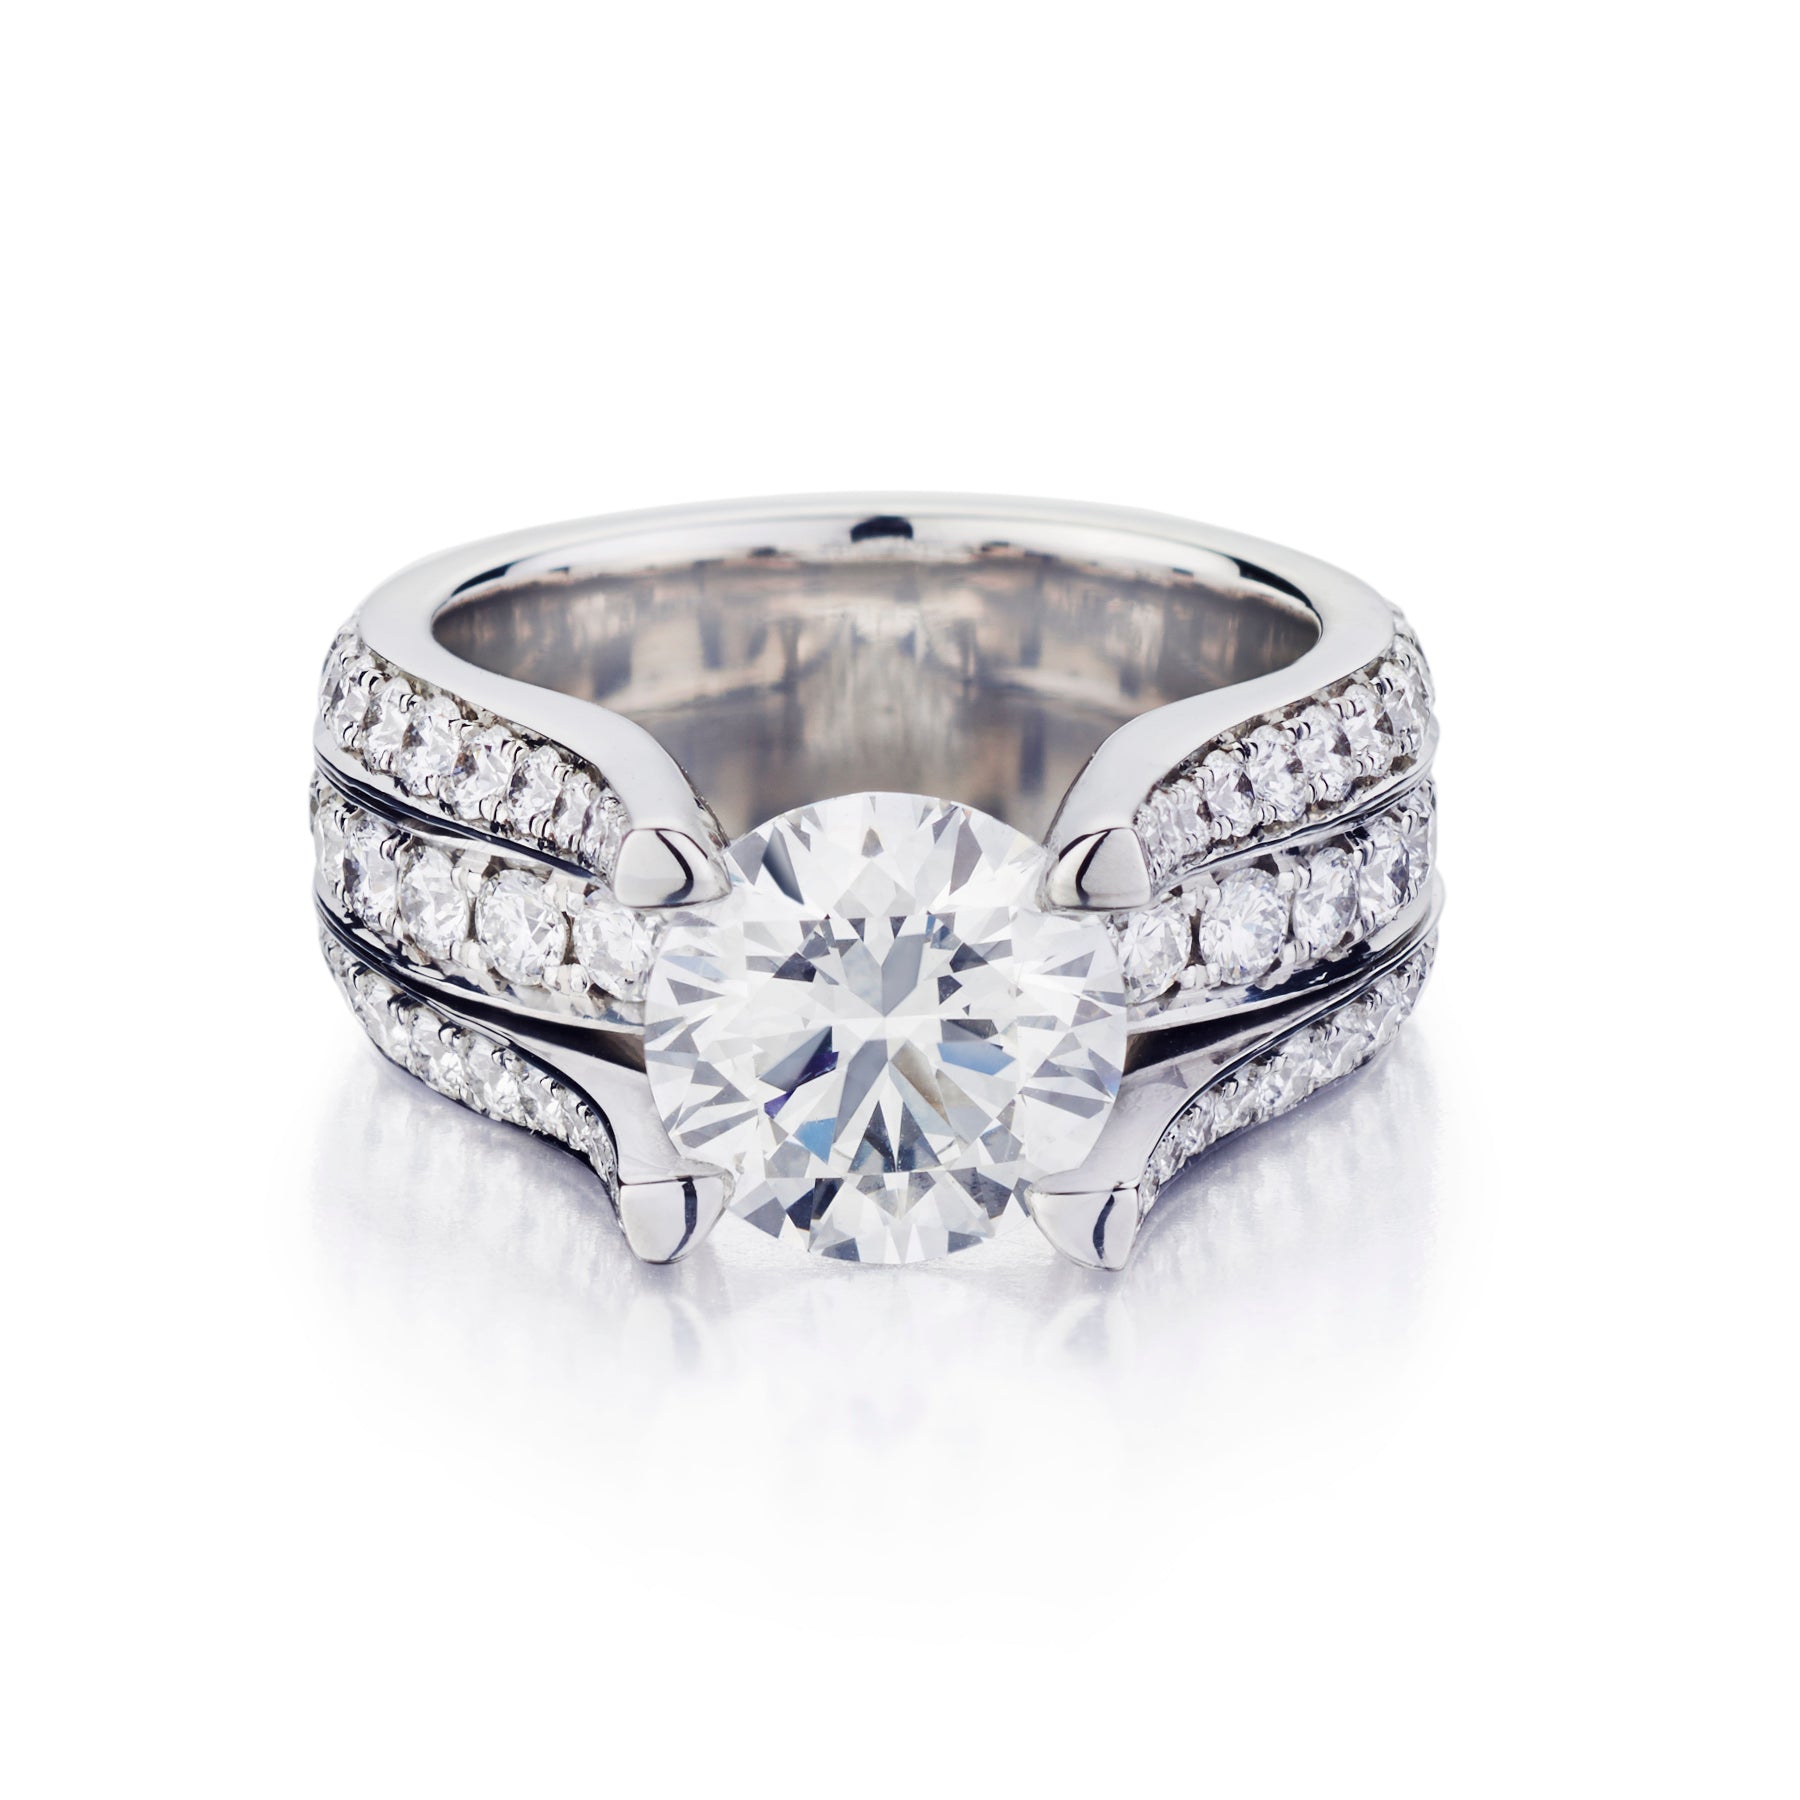 Cost for Resizing Your Ring in Toronto – Al Joher